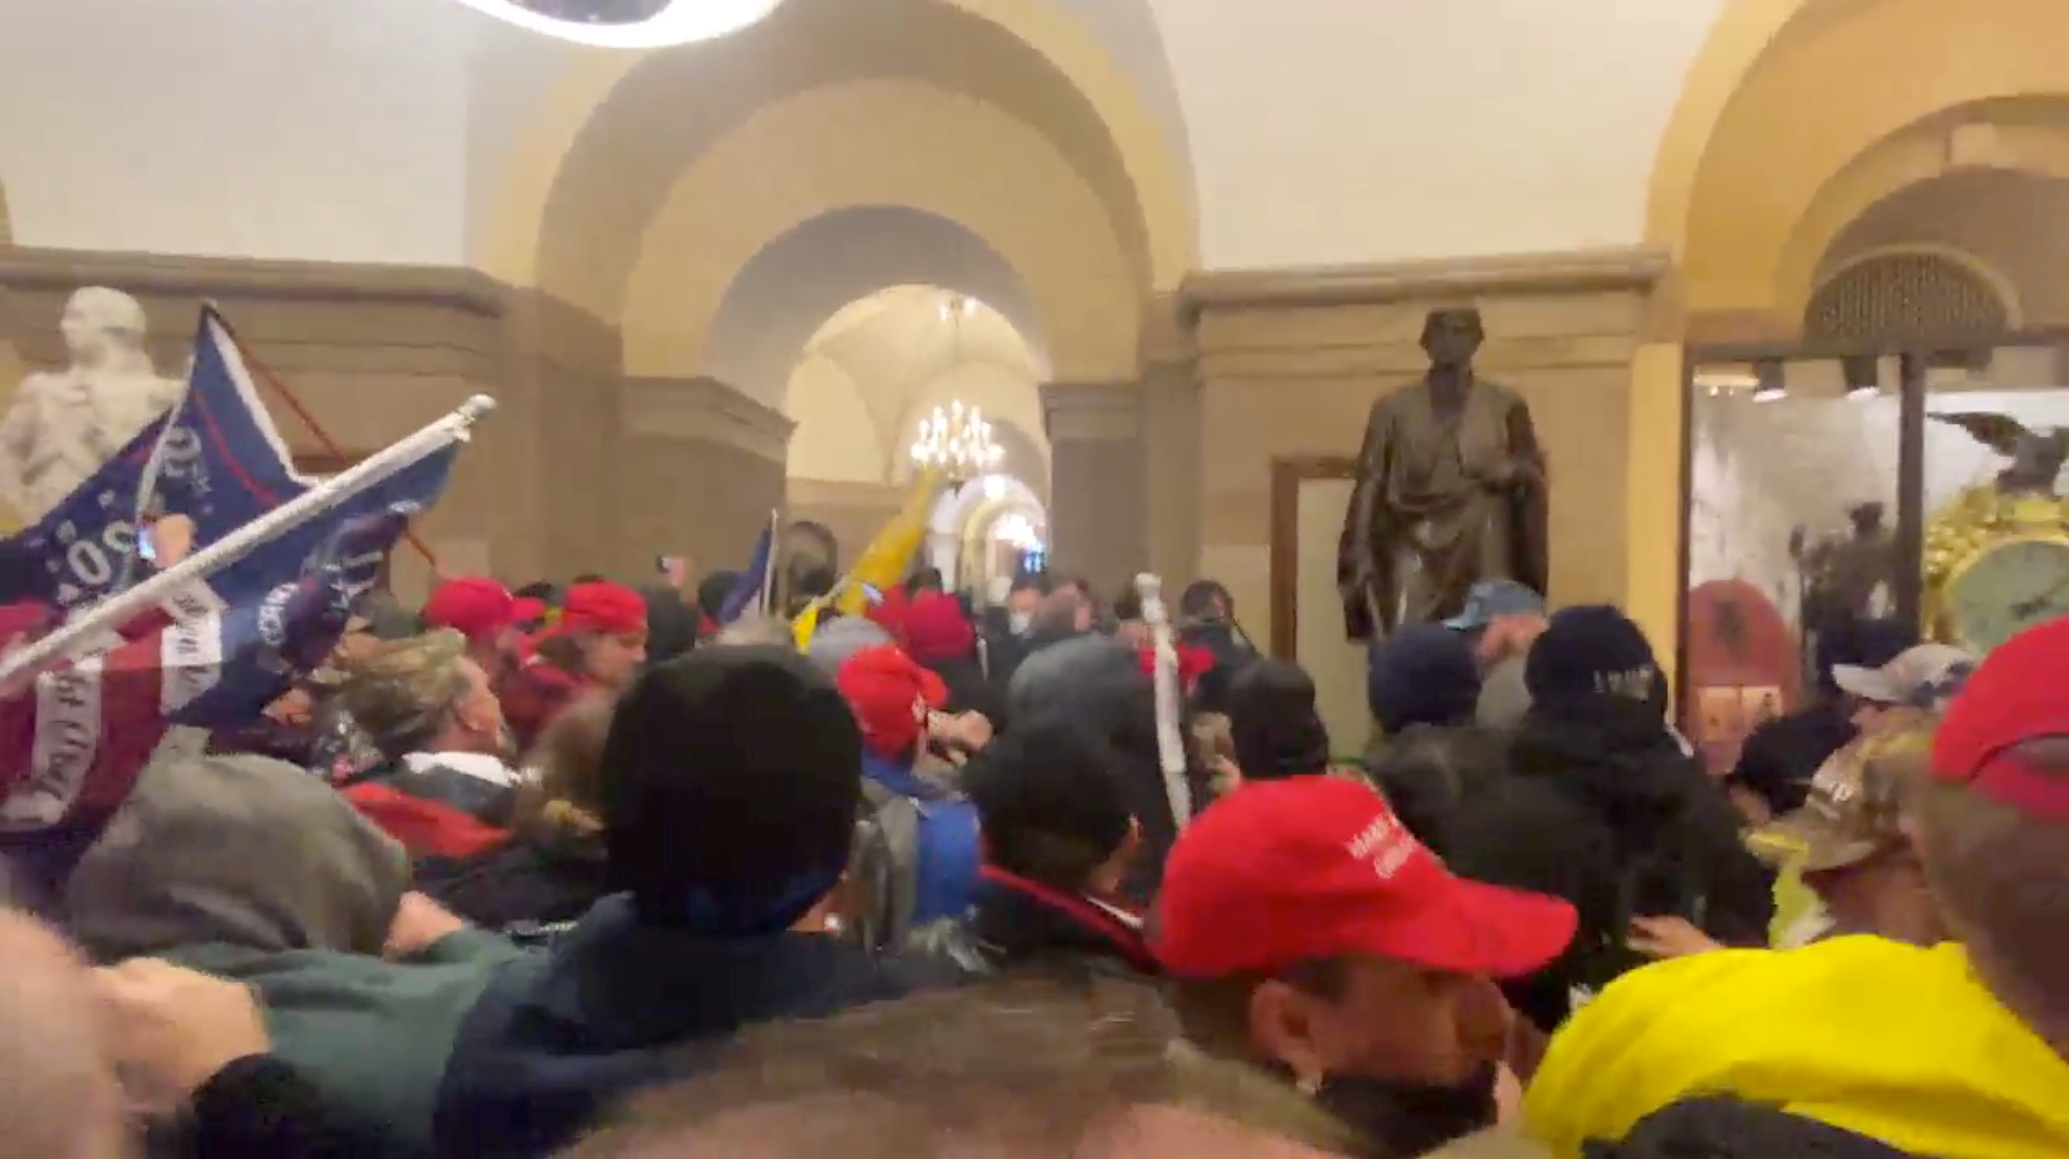 Supporters of U.S. President Donald Trump storm the Capitol in Washington